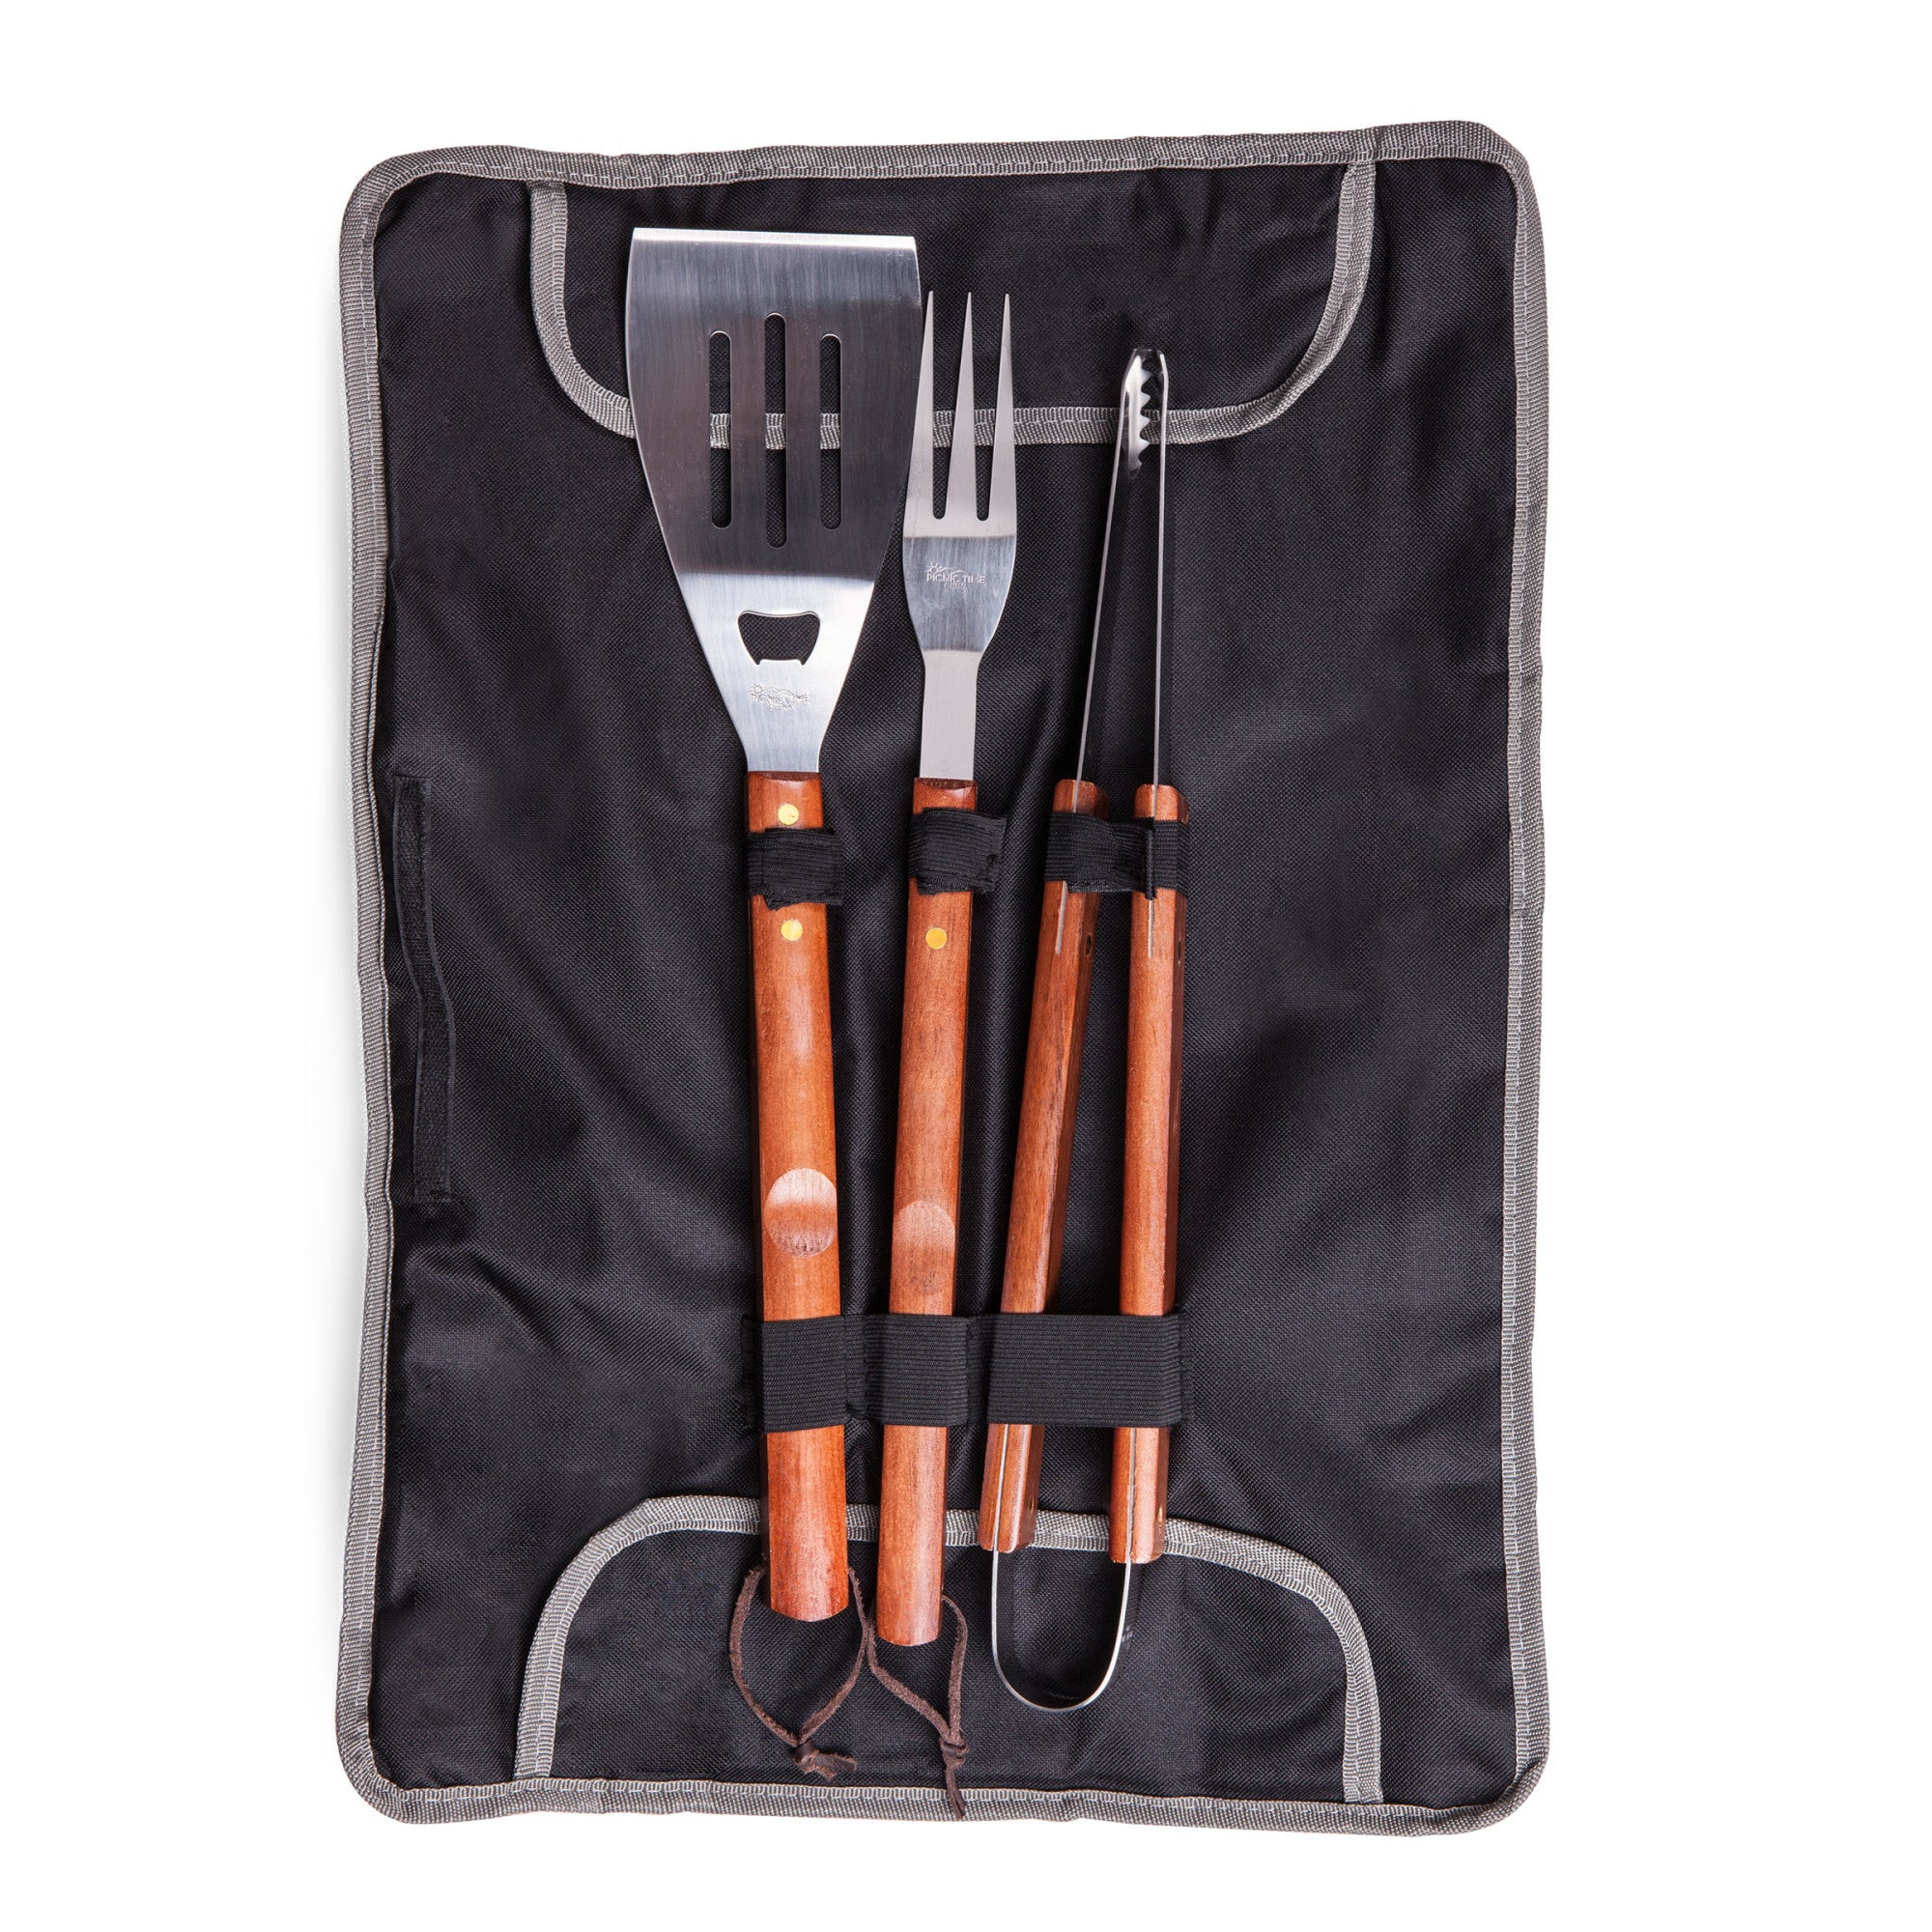 New York Yankees - 3-Piece BBQ Tote & Grill Set